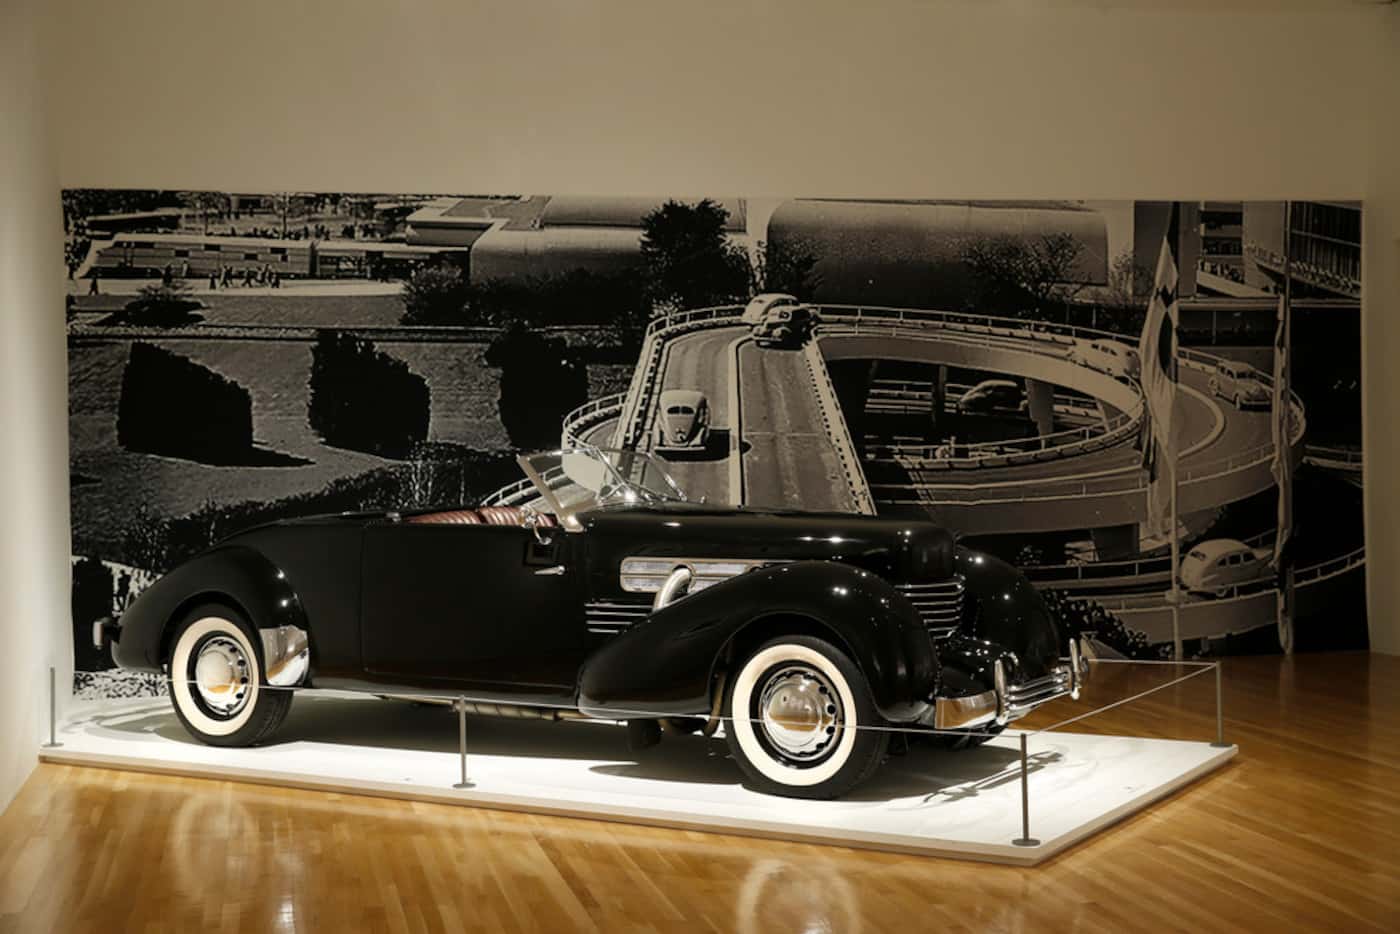 A 1937 Cord 812 Supercharged "Sportsman" Cabriolet Coupe in the "Cult of the Machine:...